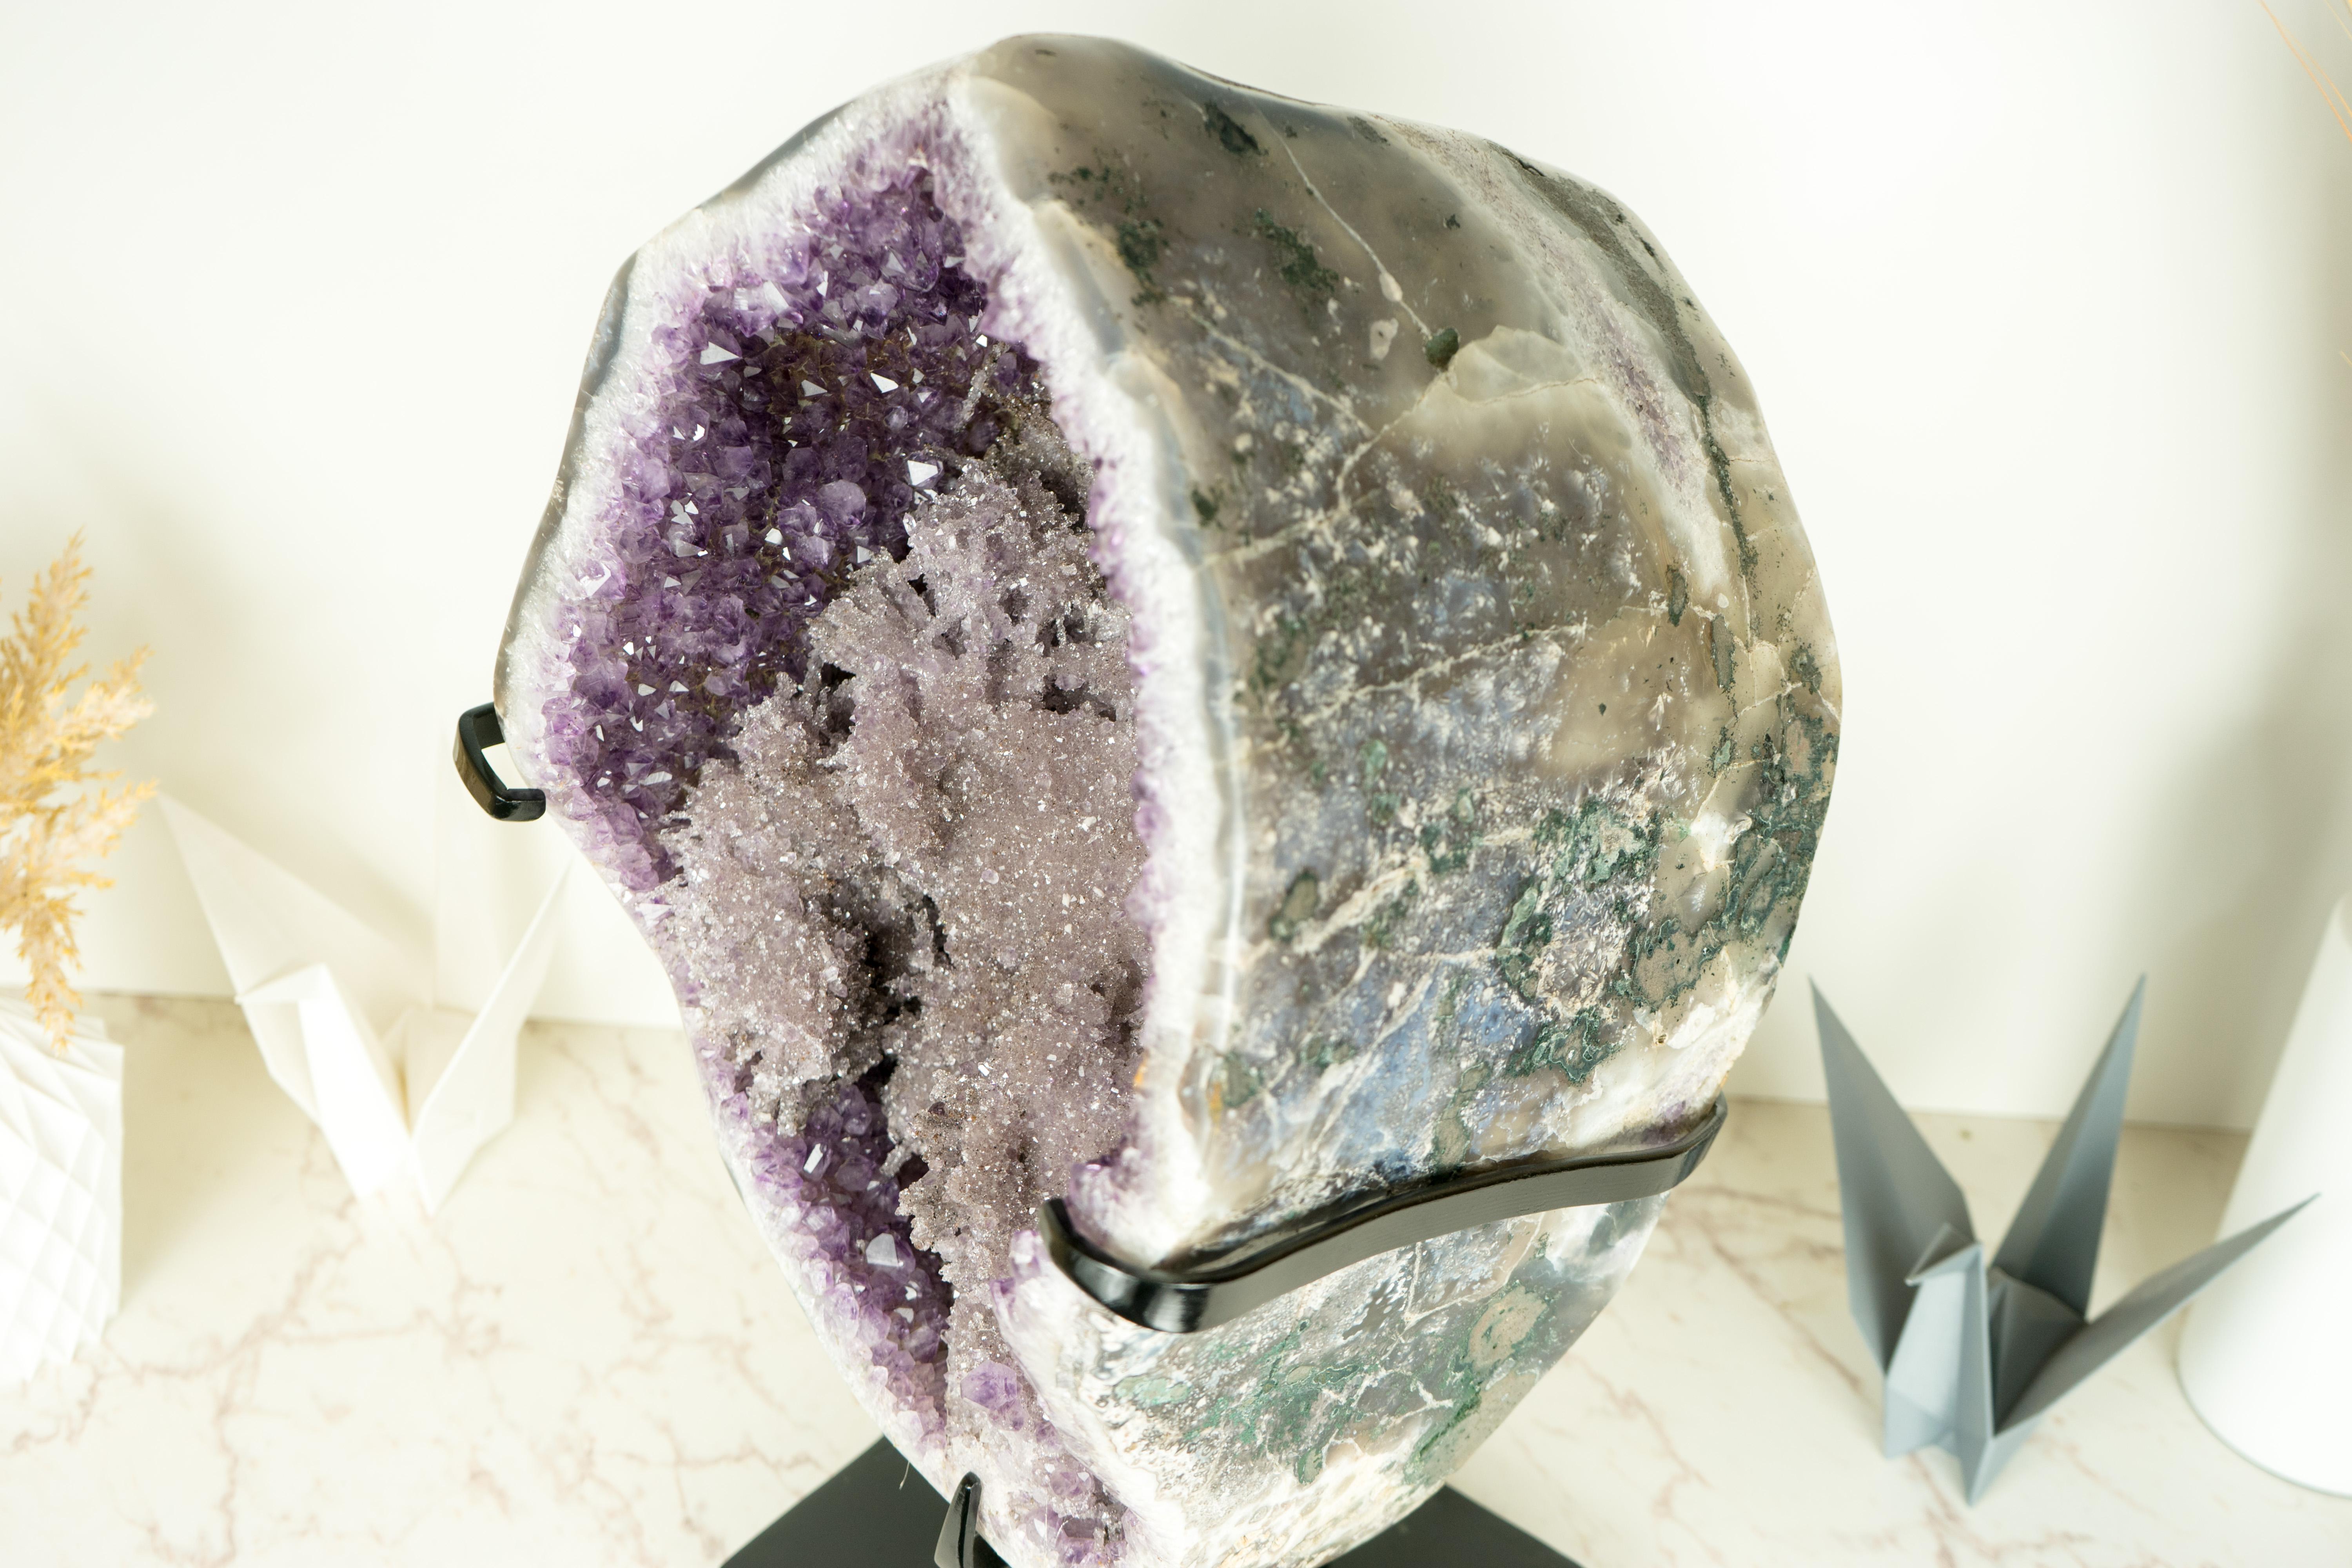 Agate Rare Amethyst Geode with Rosette Crystals and Herkimer Diamond-like Clarity  For Sale